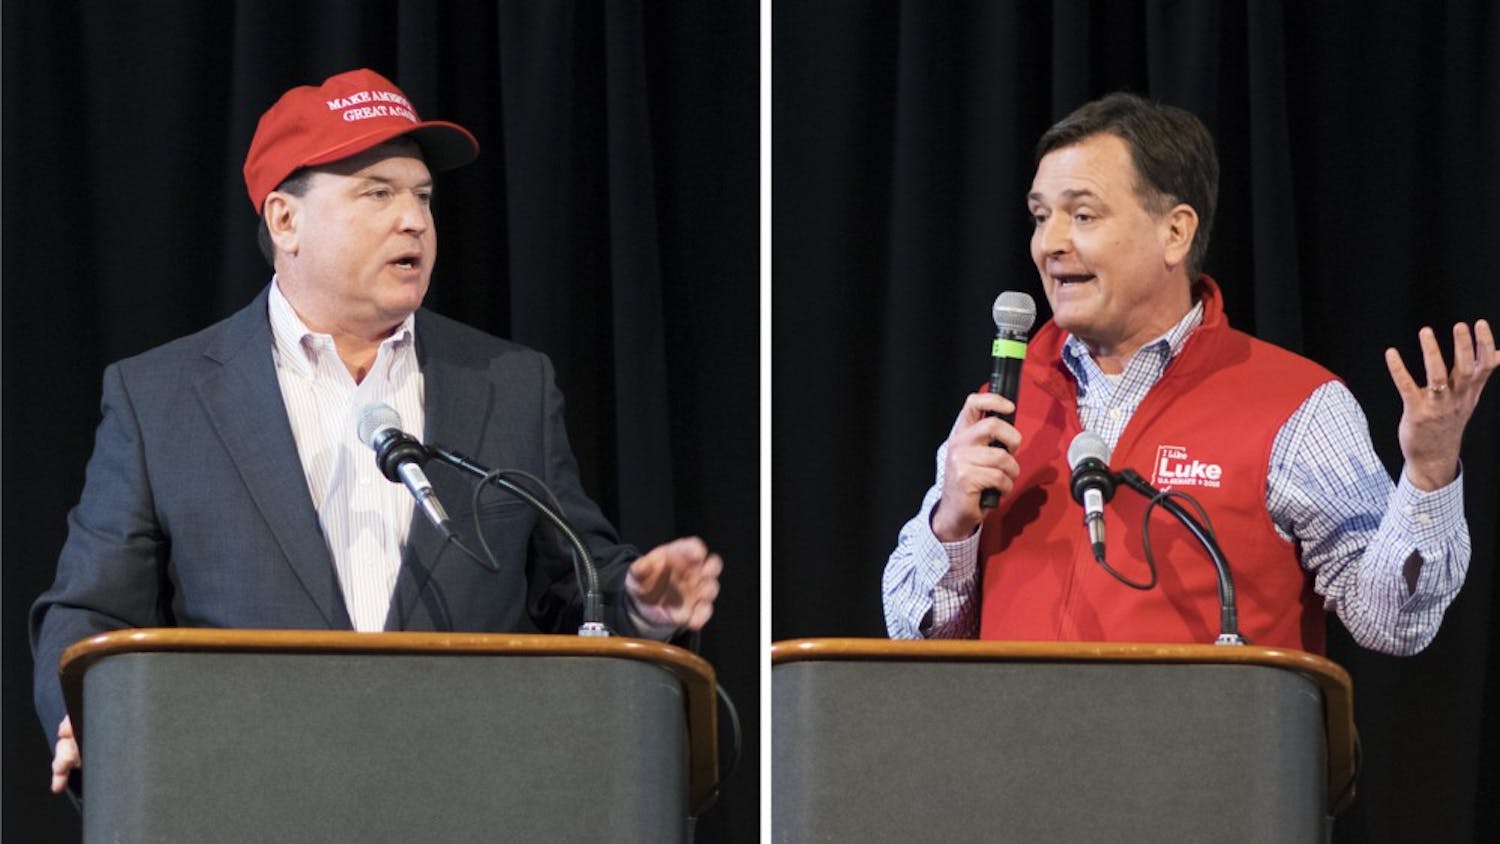 Congressmen Todd Rokita, R-4th District, and Luke Messer, R-6th District, deliver remarks at the state Republican party's Congress of Countries on Saturday. Neither of the two front-runners for the Republican nomination in Indiana's 2018 Senate primary disavowed President Trump's reported complaints about accepting immigrants from "shithole countries."&nbsp;